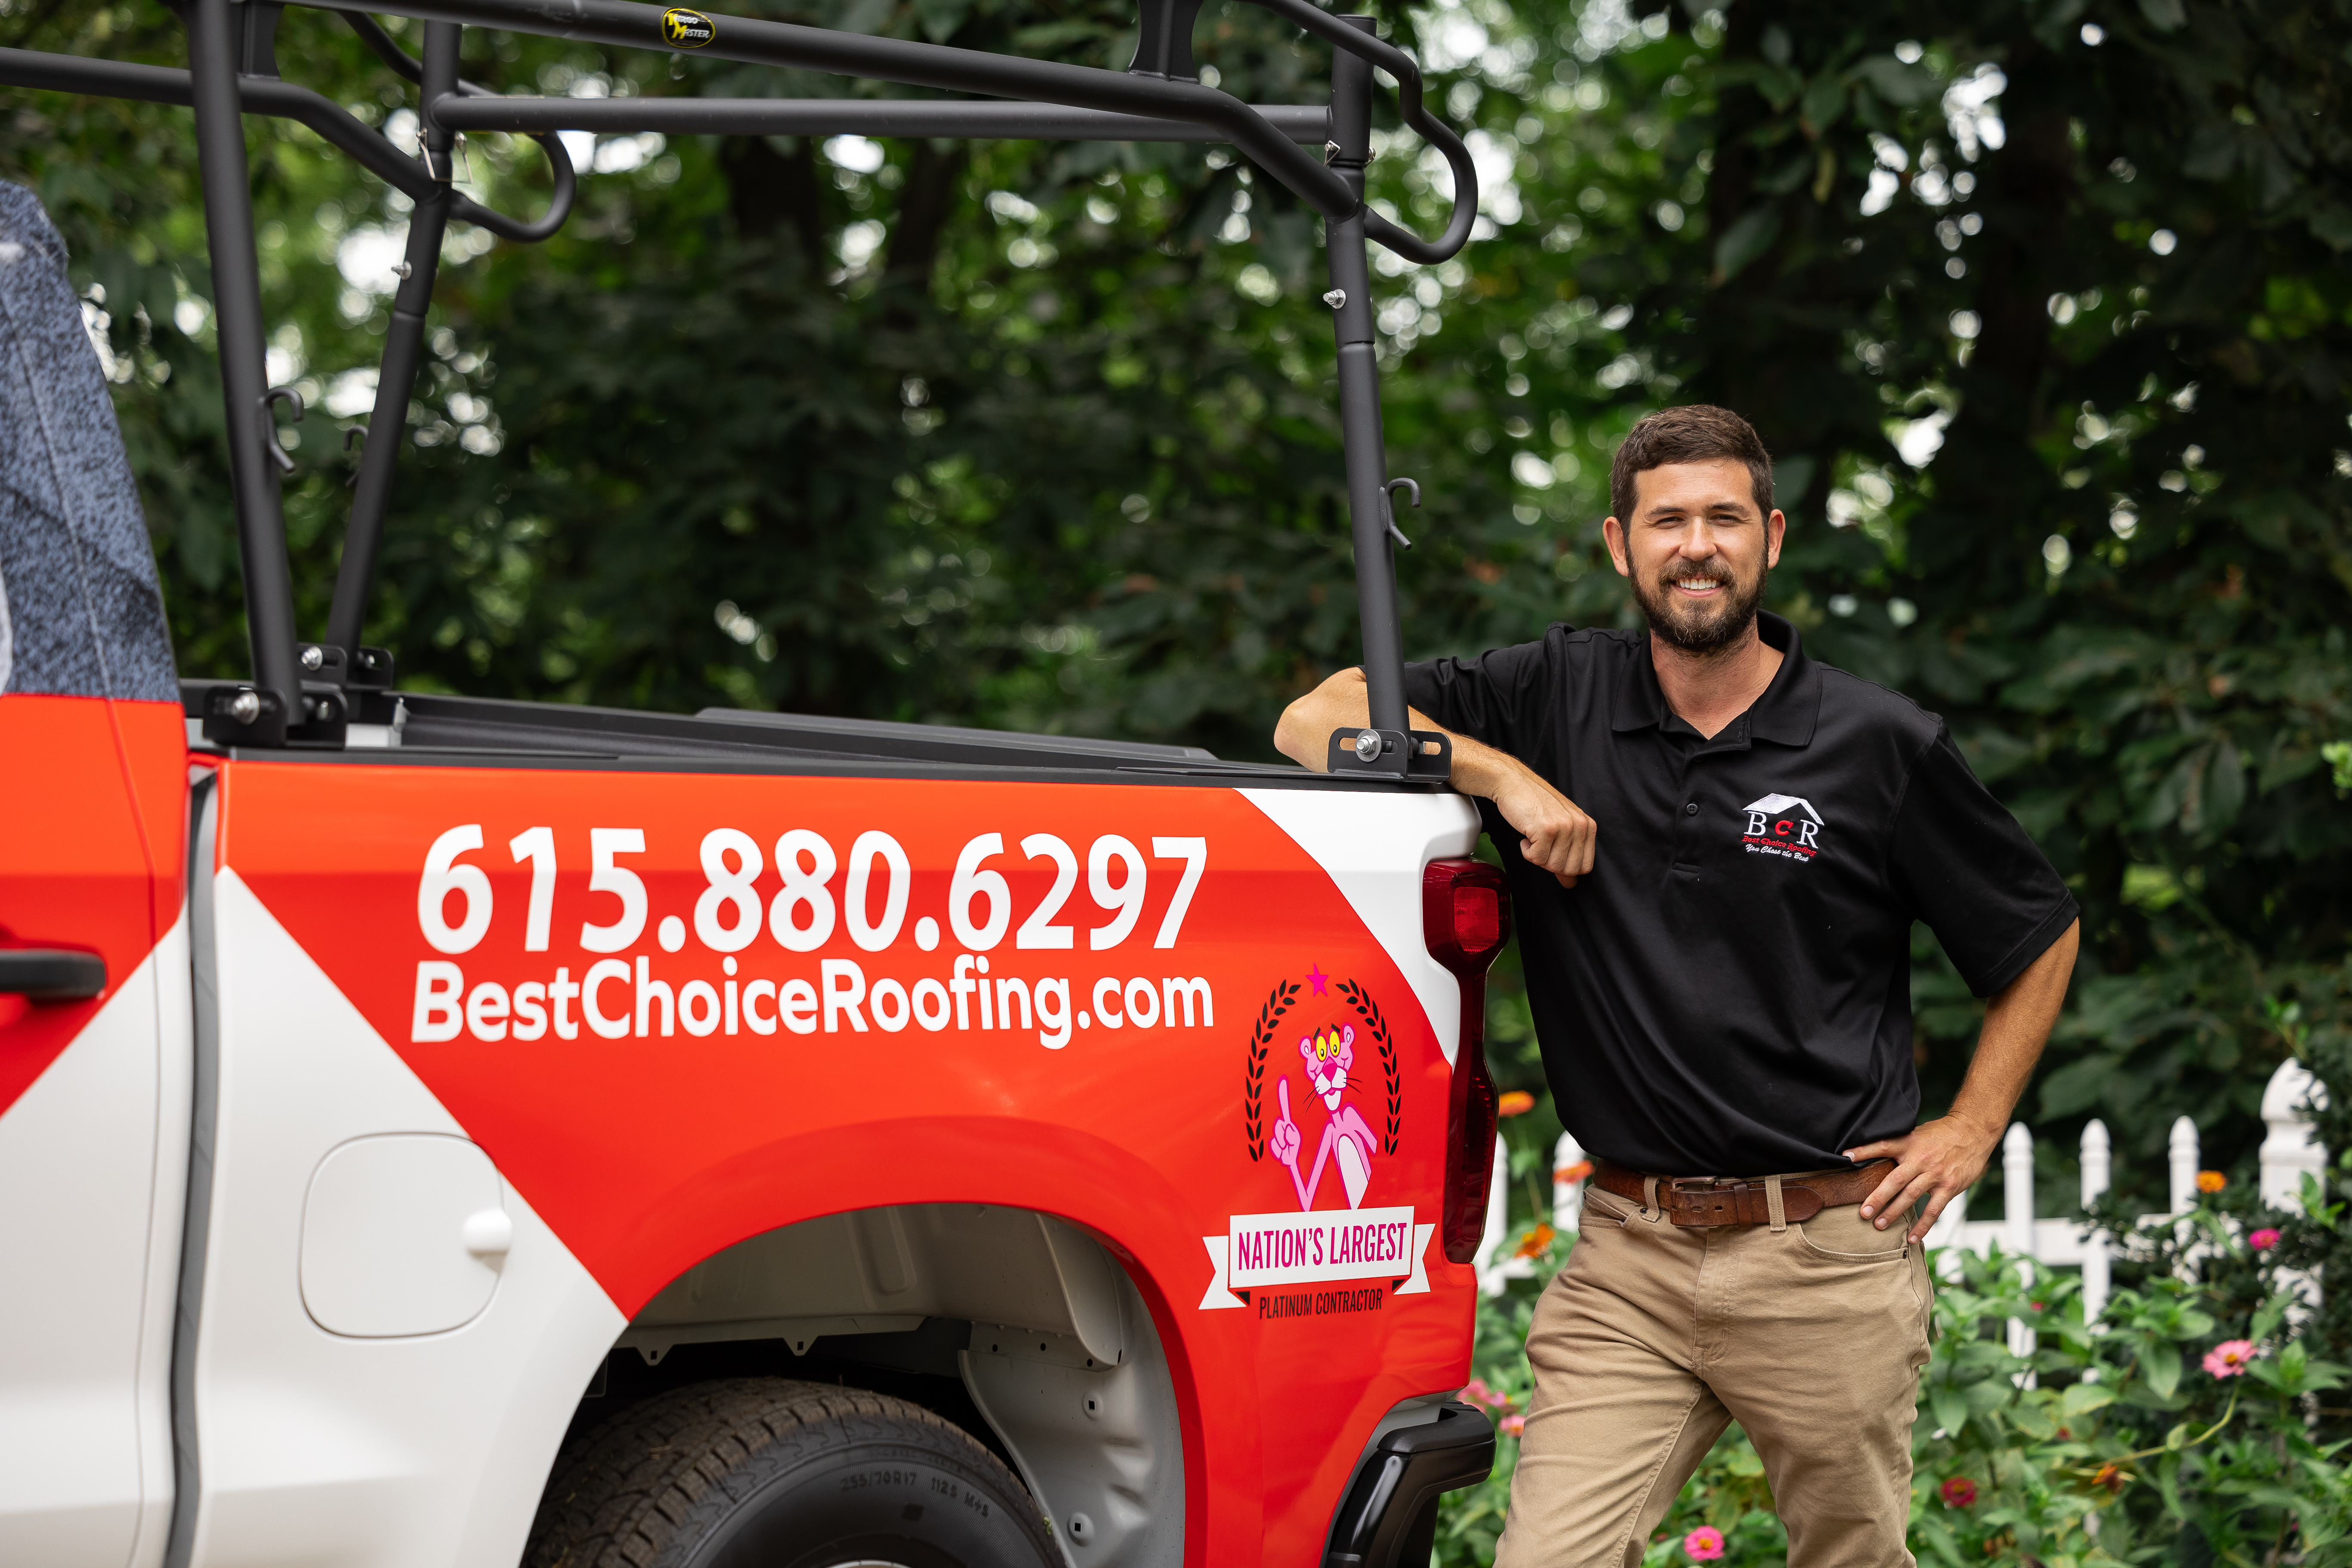 Best Choice Roofing - Trusted roofing contractors